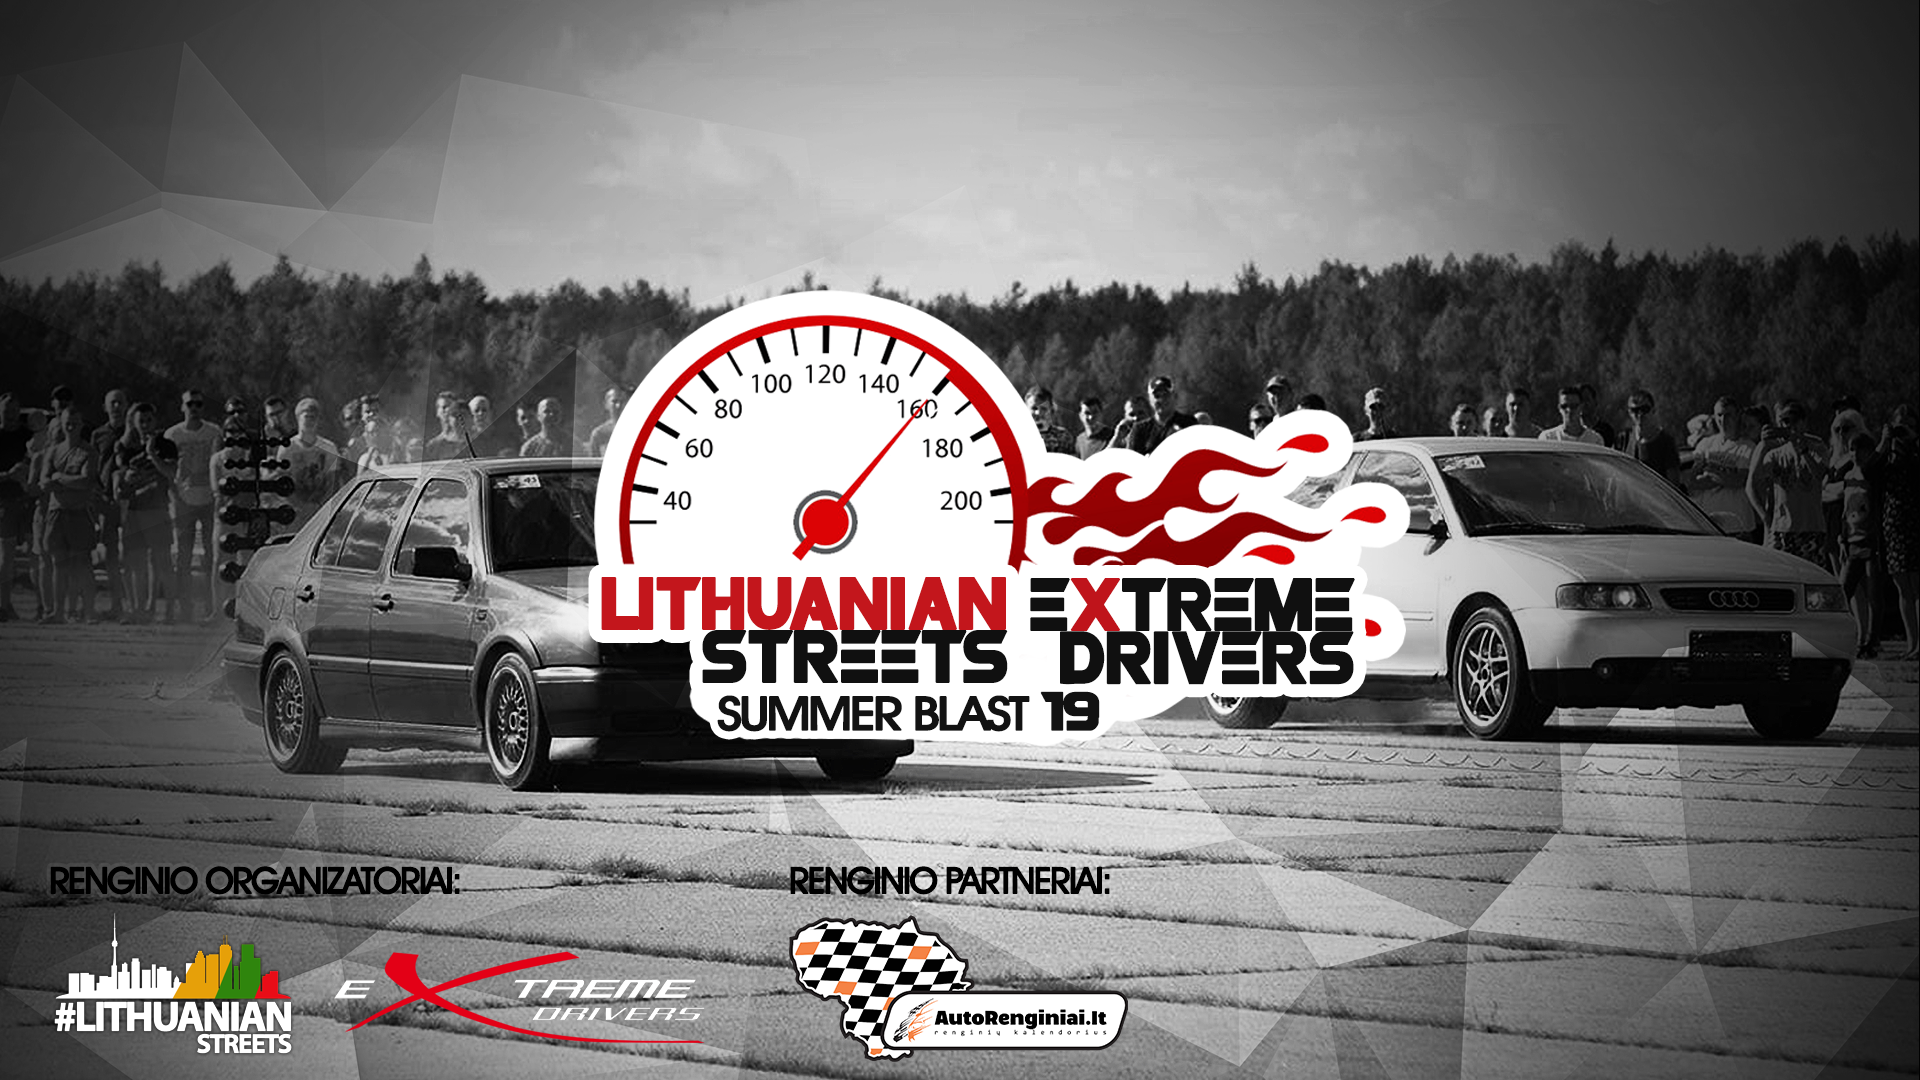 Lithuanian StreetsExtreme Drivers Summer Blast '19